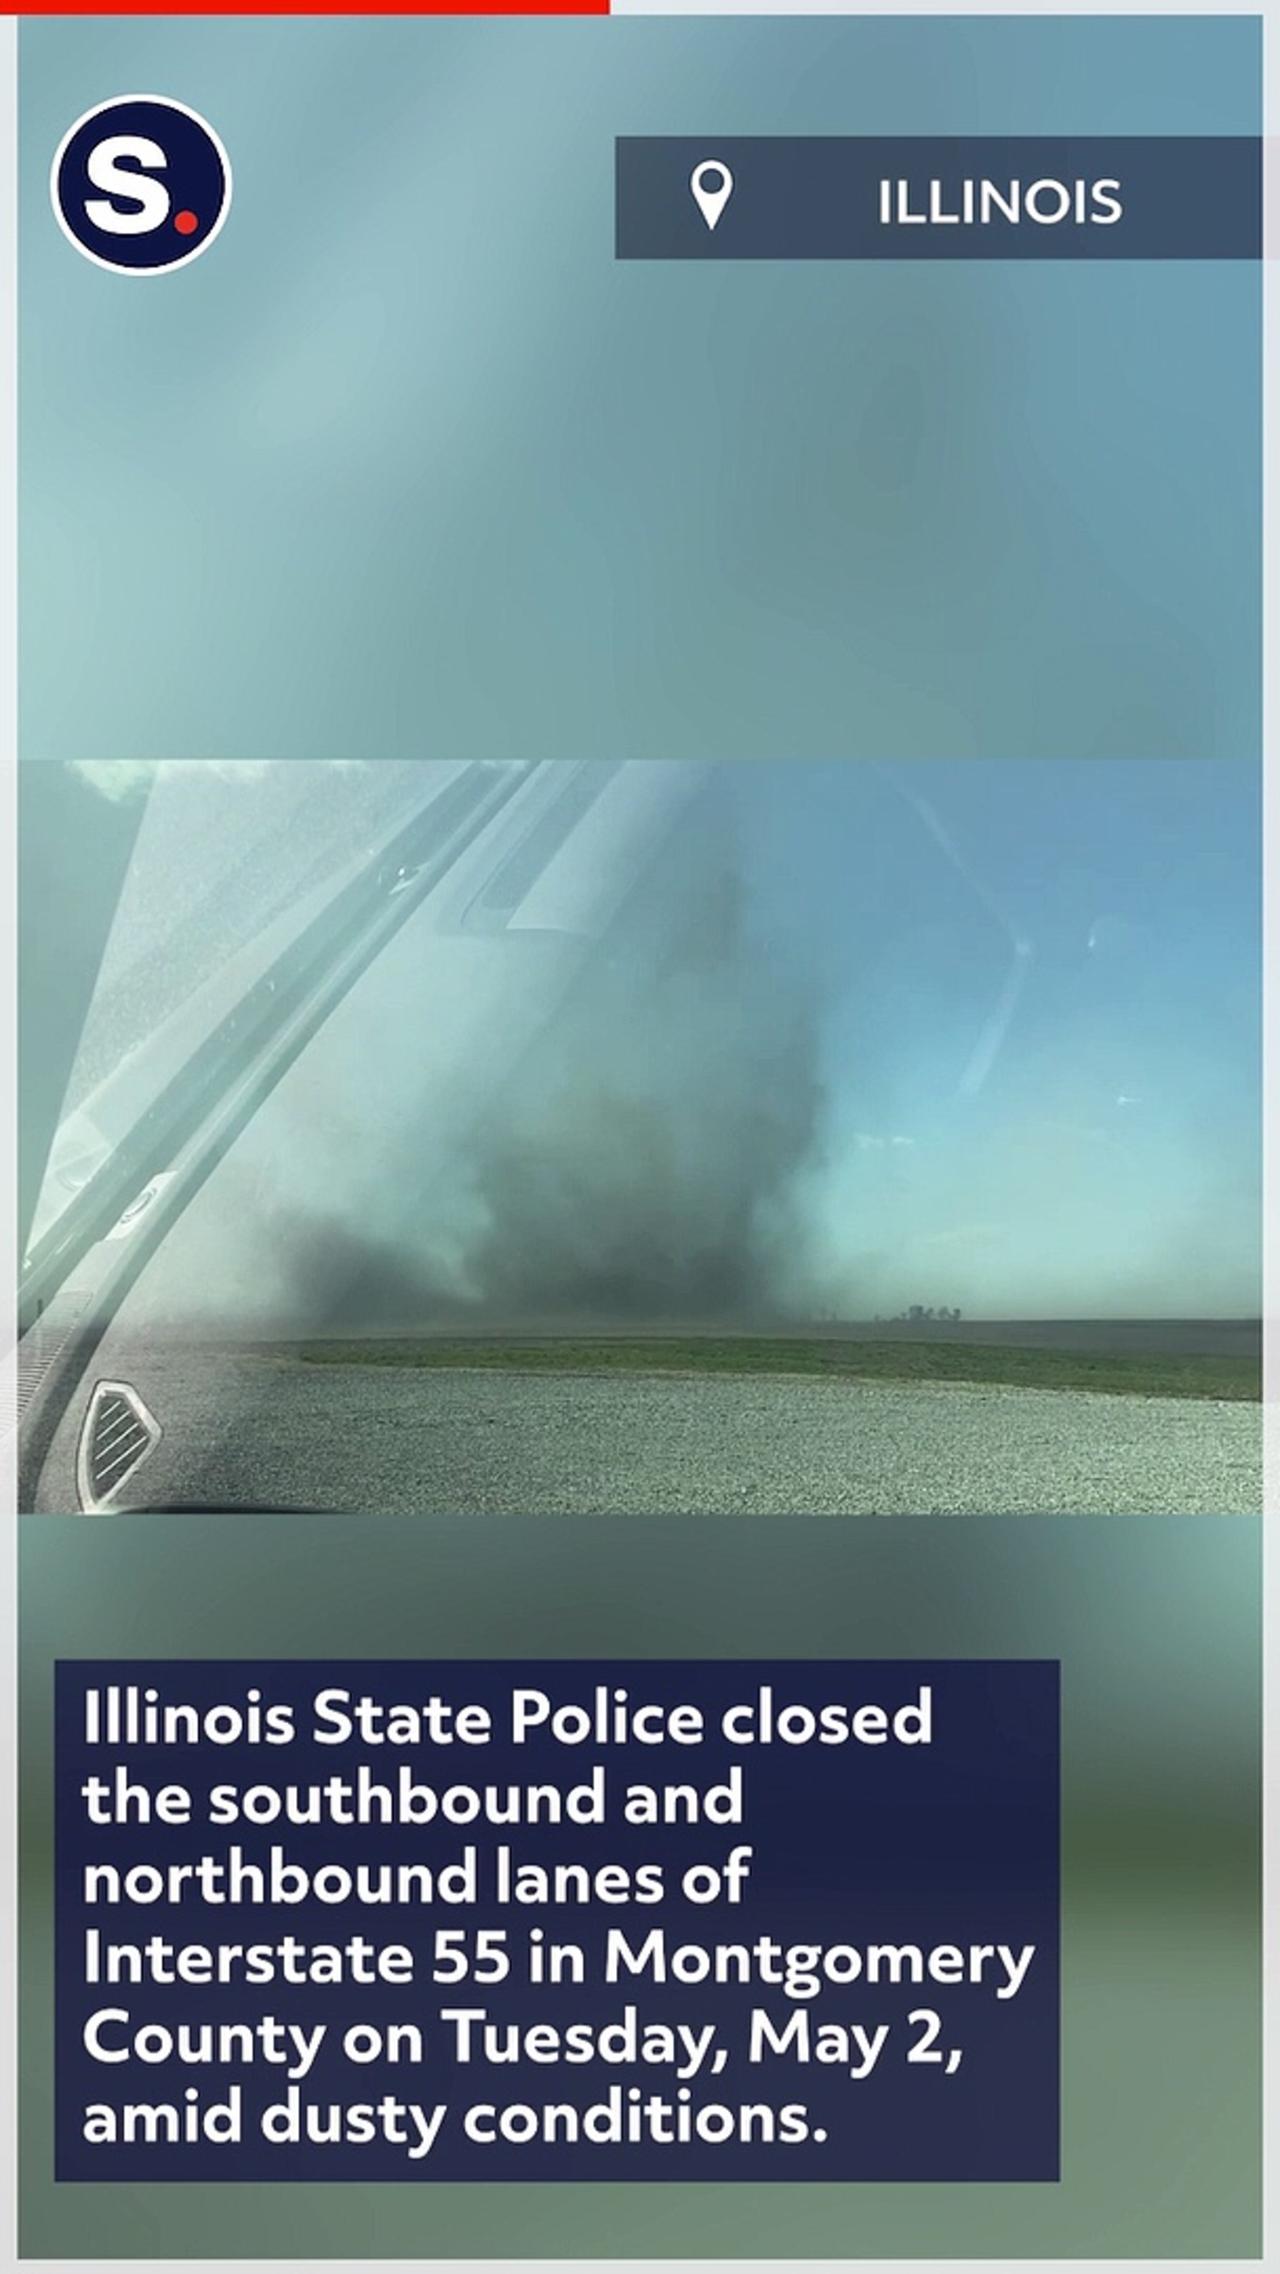 Dust Storm Lowers Visibility on I-55 in South Illinois